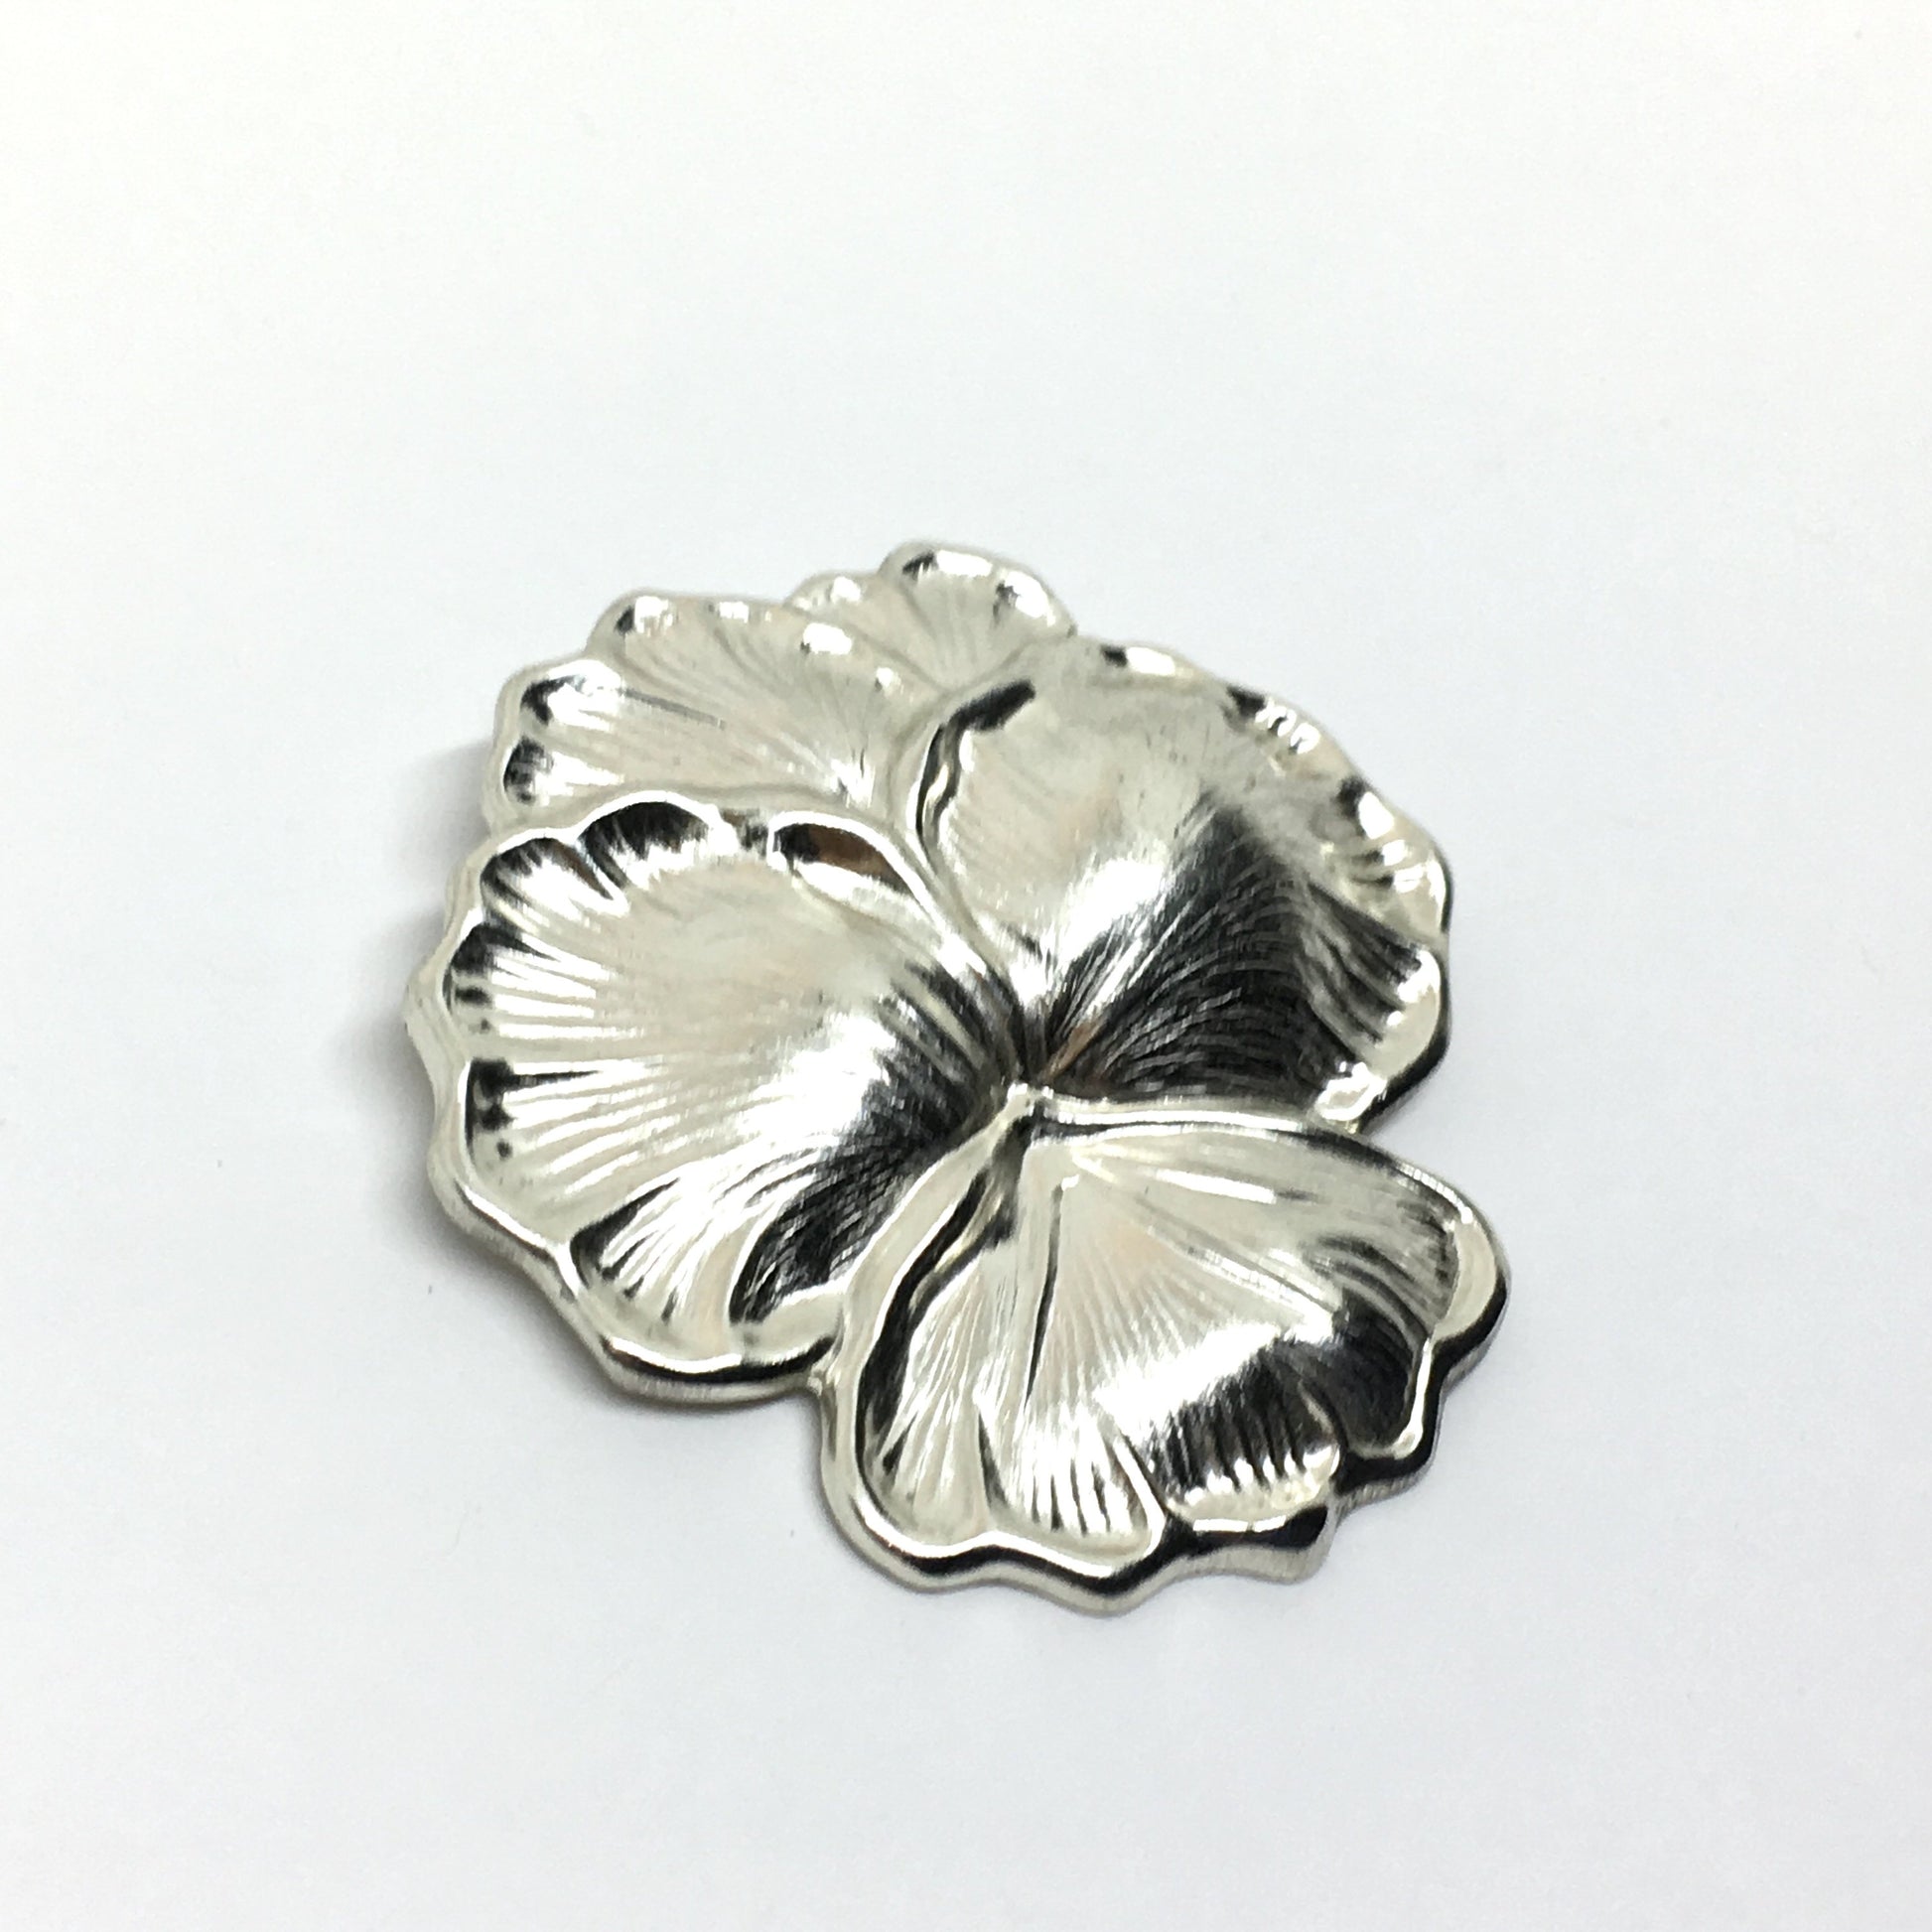 Used Jewelry - Elegant Sterling Silver Iris Flower Convertible Pendant - Brooch / Lapel Pin - at Blingschlingers.com Proudly in the USA